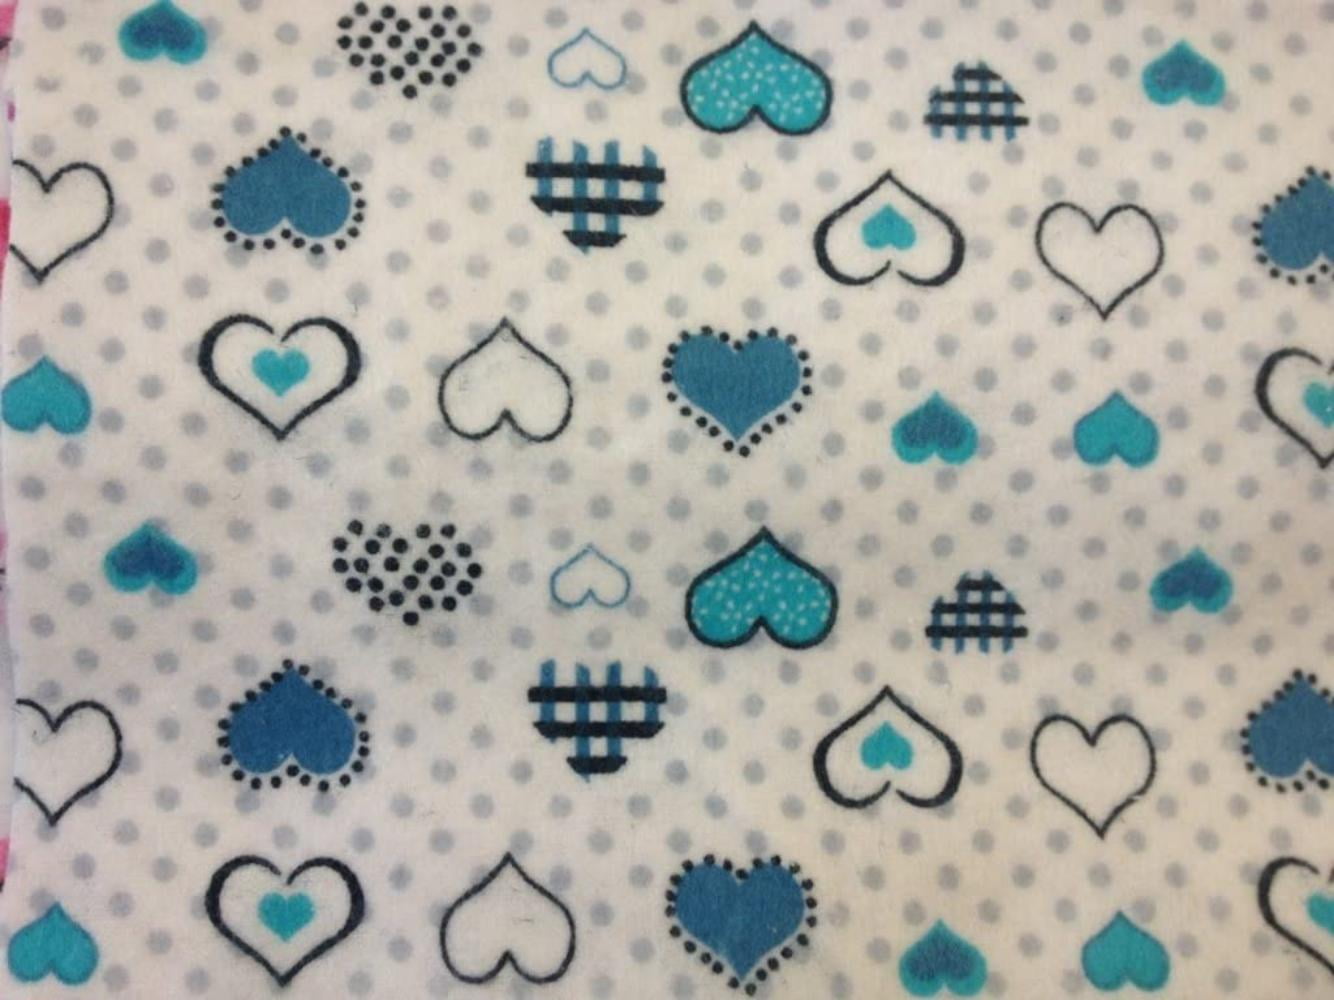 By the yard Flannel Fabric Hearts and Dots on White 100% Cotton Flannel